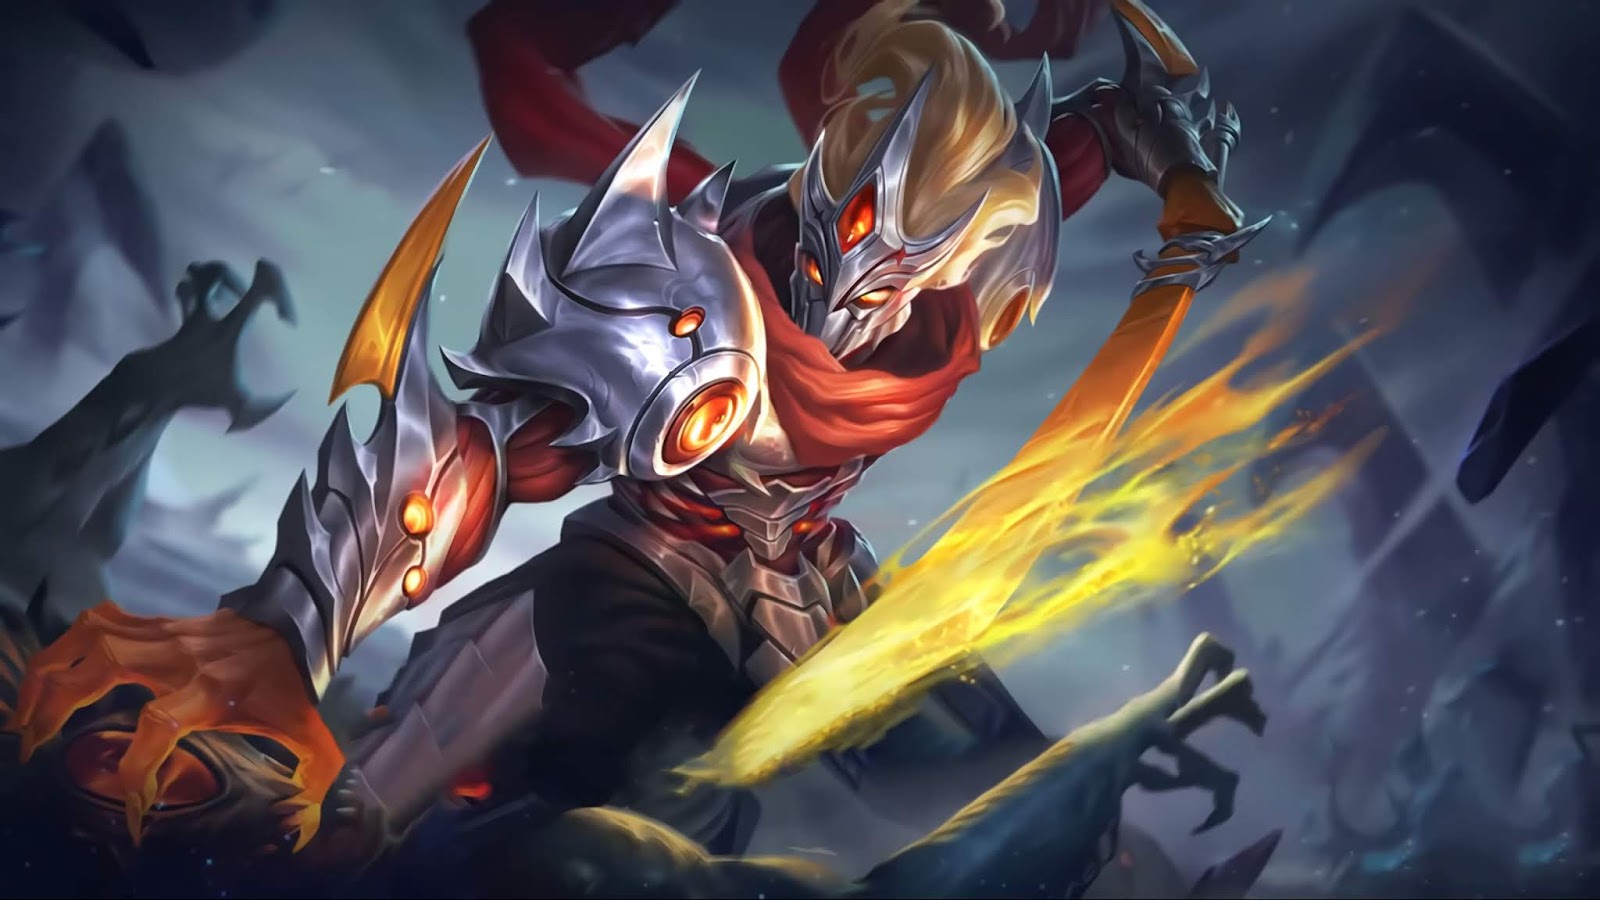 15+ Wallpaper Hayabusa Mobile Legends Full HD for PC, Android & iOS